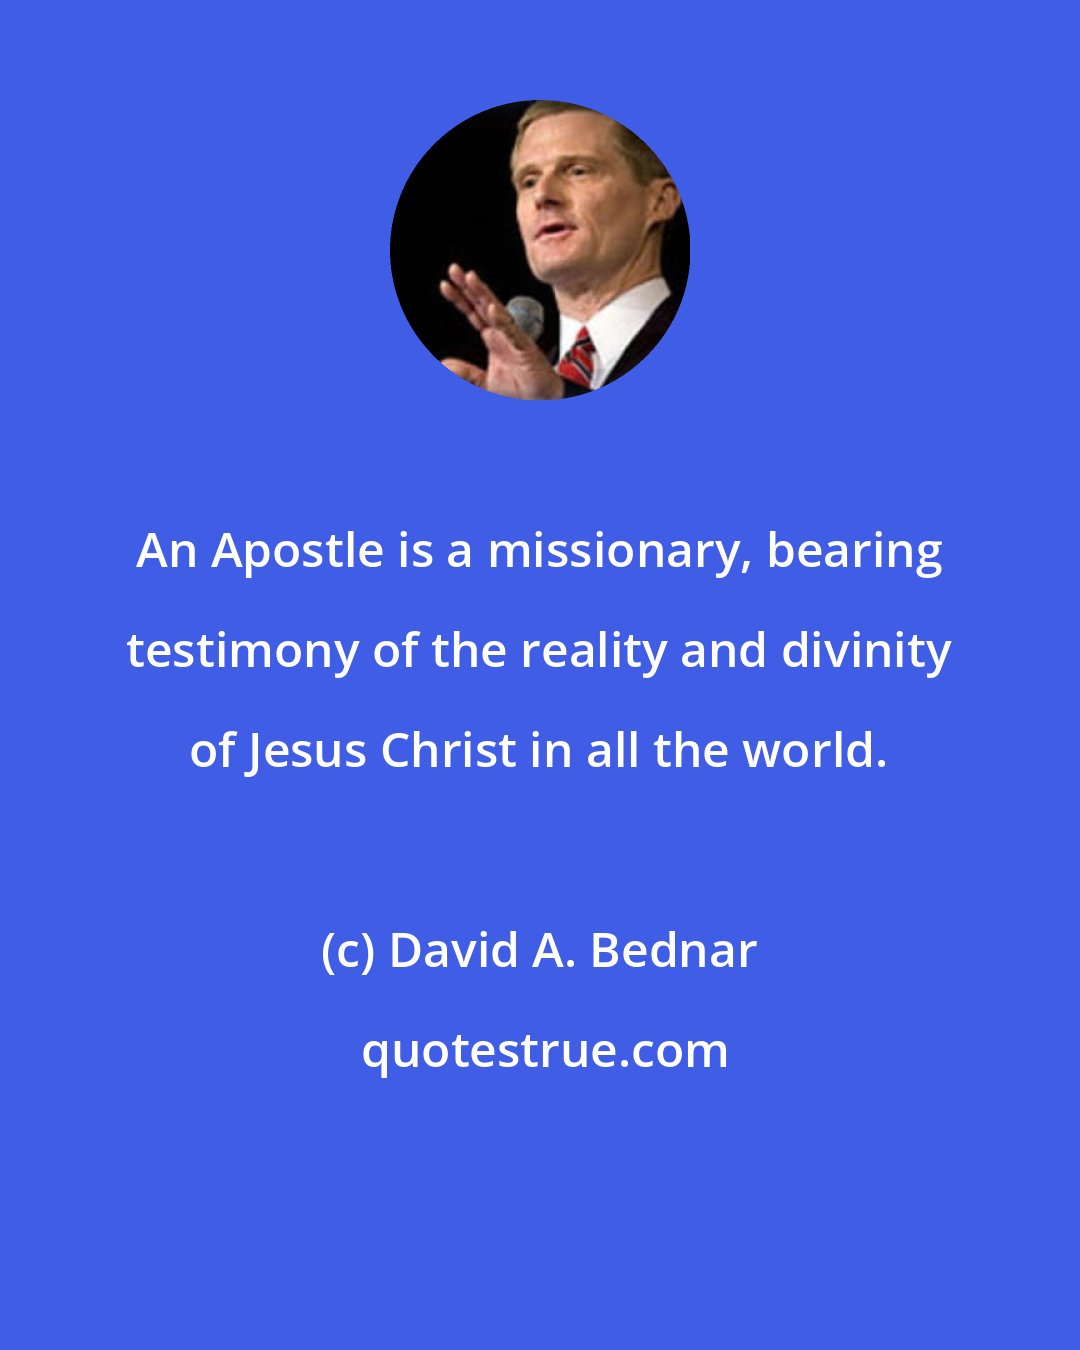 David A. Bednar: An Apostle is a missionary, bearing testimony of the reality and divinity of Jesus Christ in all the world.